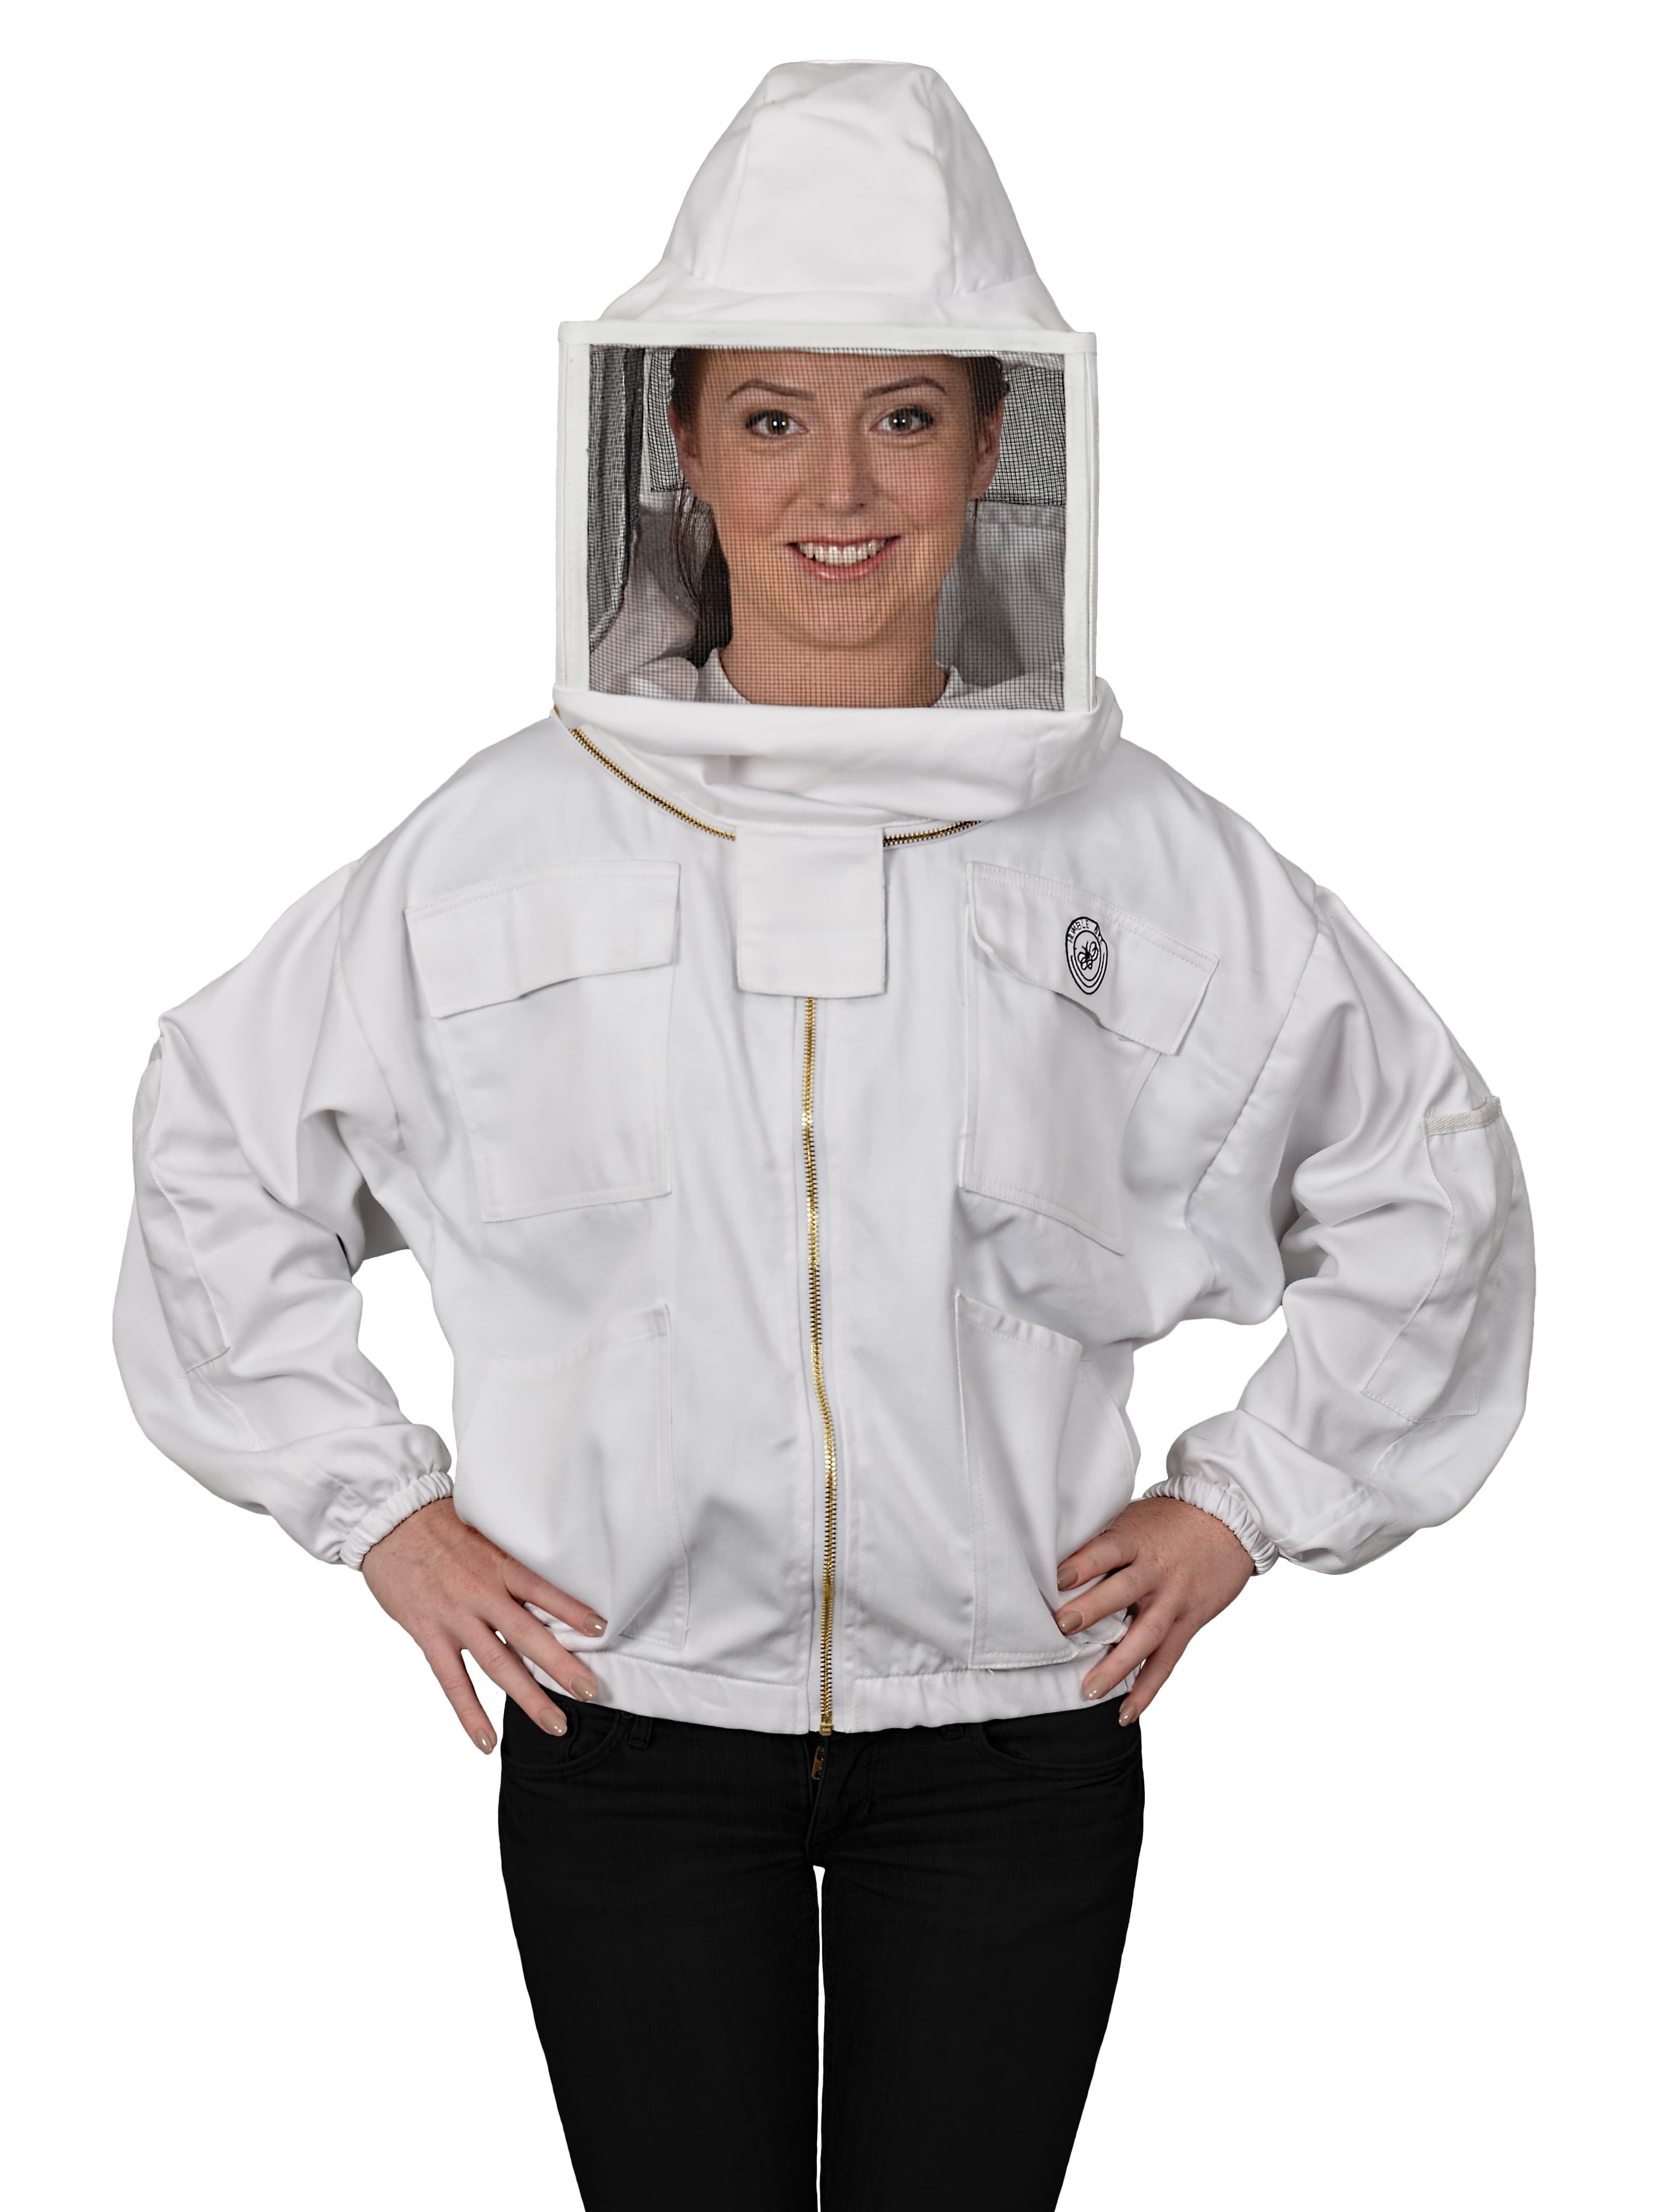 Humble 330 Ventilated Beekeeping Jacket with Round Veil